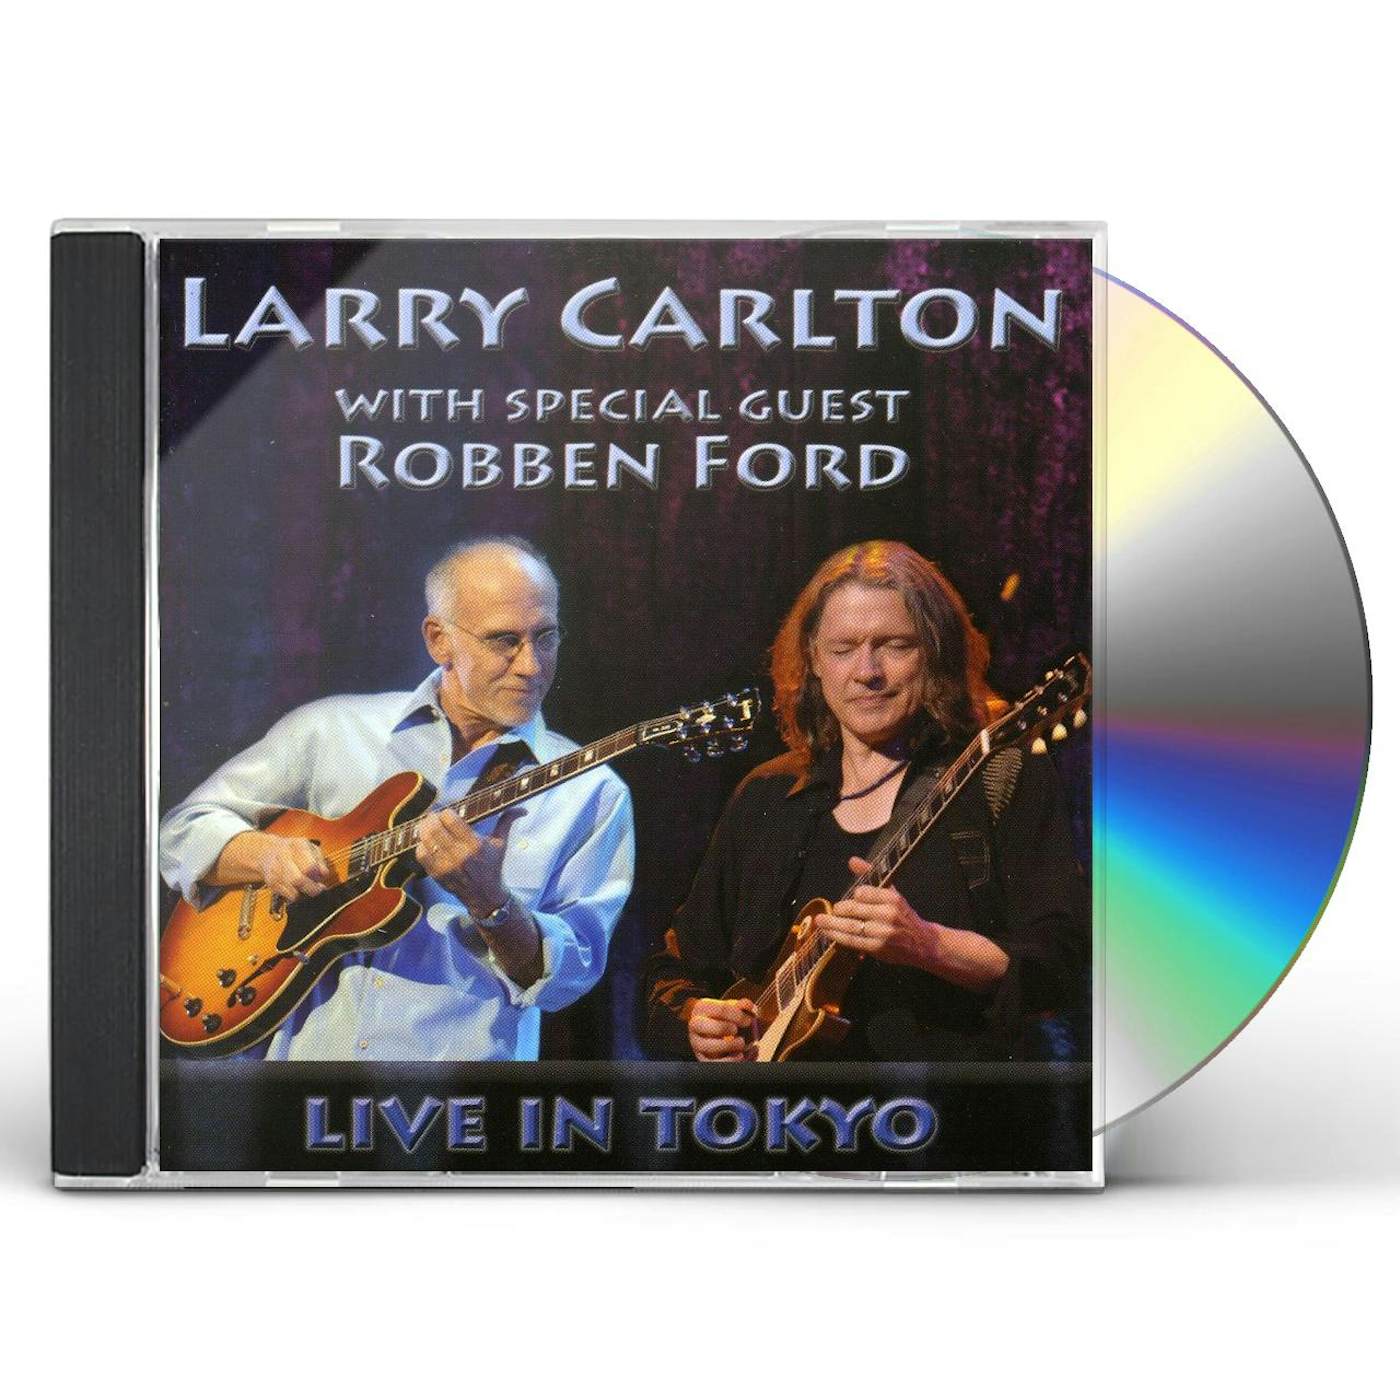 Larry Carlton WITH SPECIAL GUEST ROBBEN FORD: LIVE IN TOKYO CD